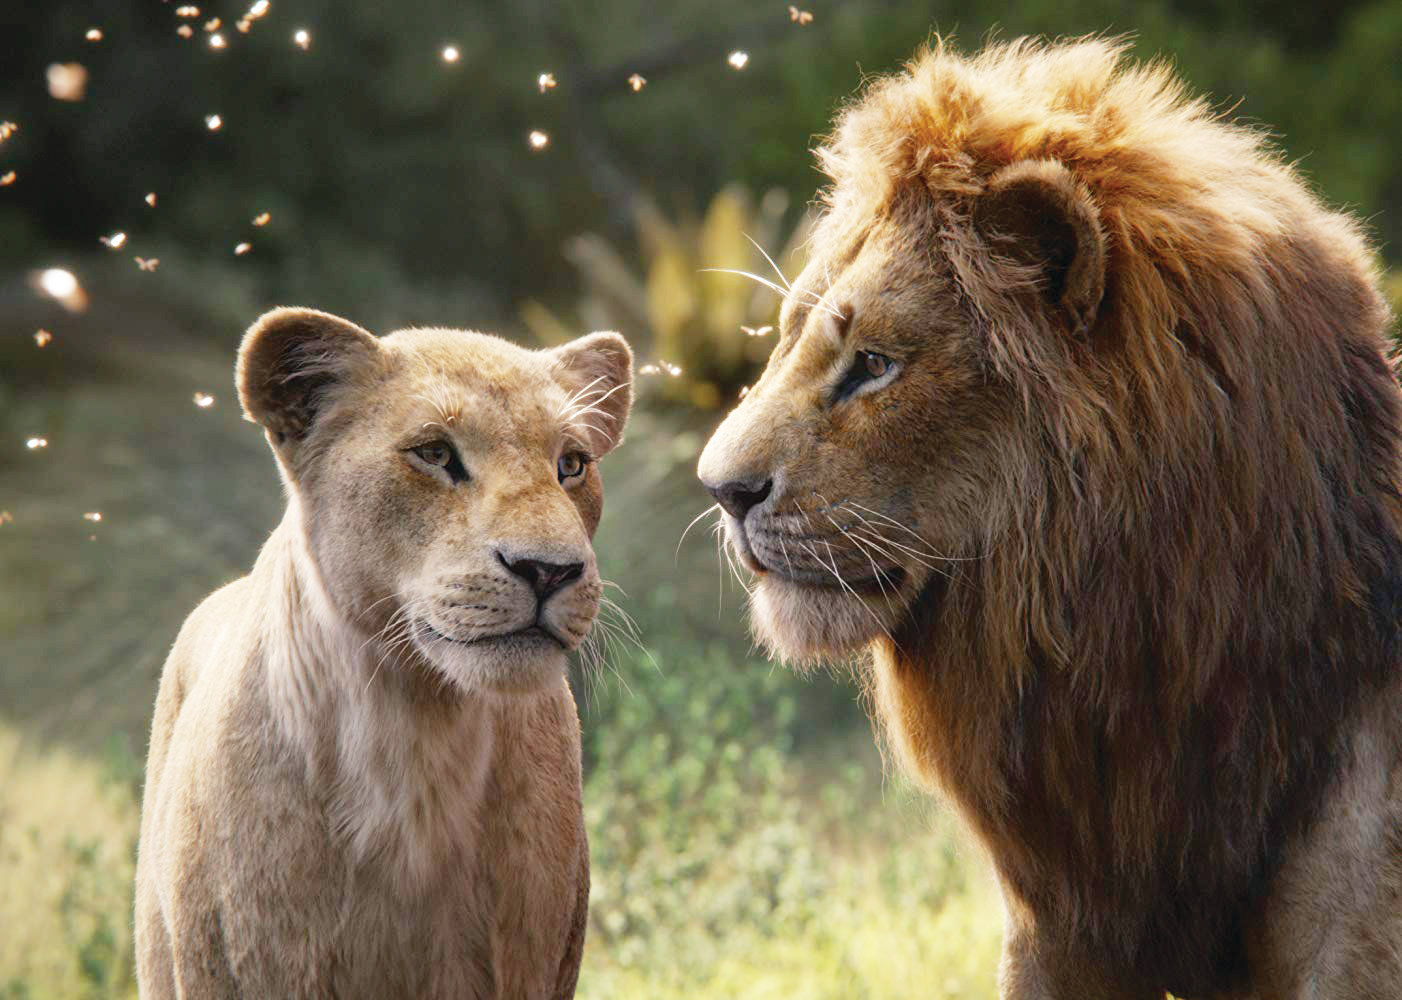 Beyoncé and Donald Glover star as the voices of adult Nala (left) and adult Simba in Disney's live-action remake of The Lion King.